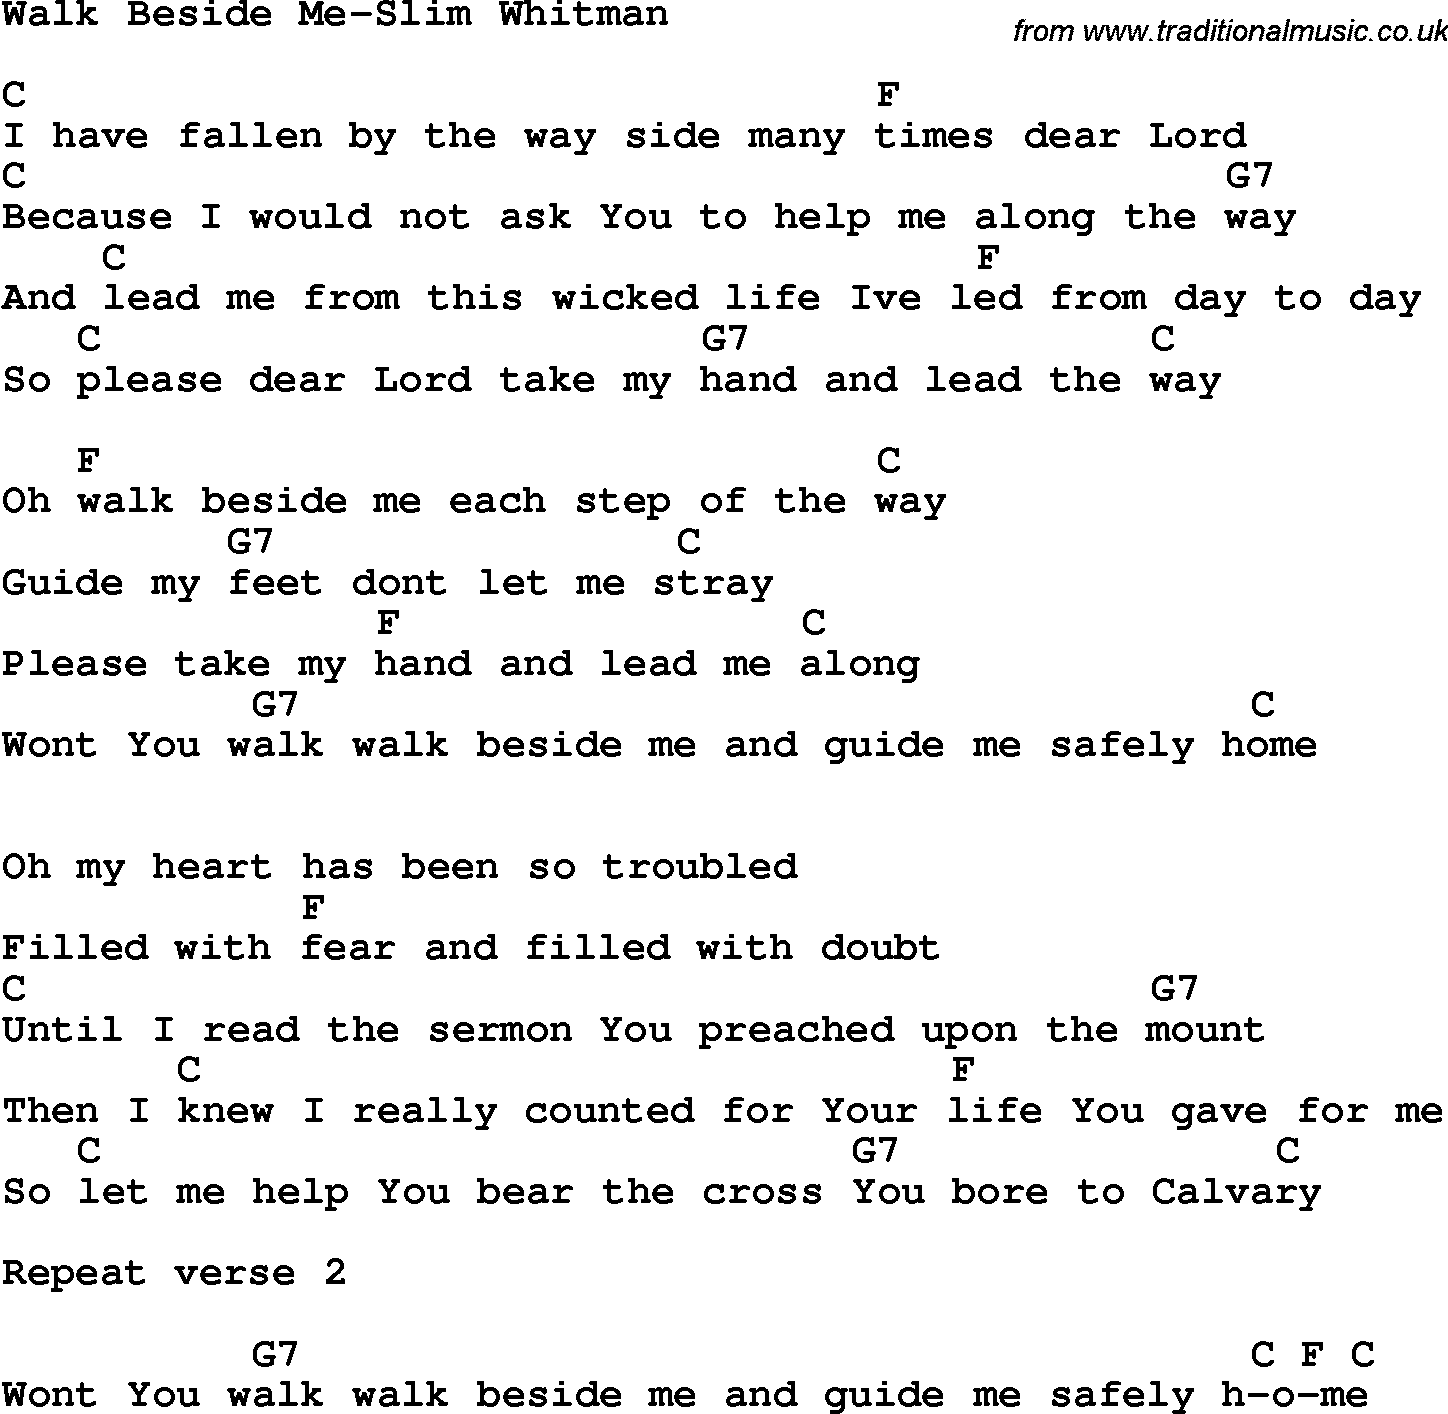 Country, Southern and Bluegrass Gospel Song Walk Beside Me-Slim Whitman lyrics and chords